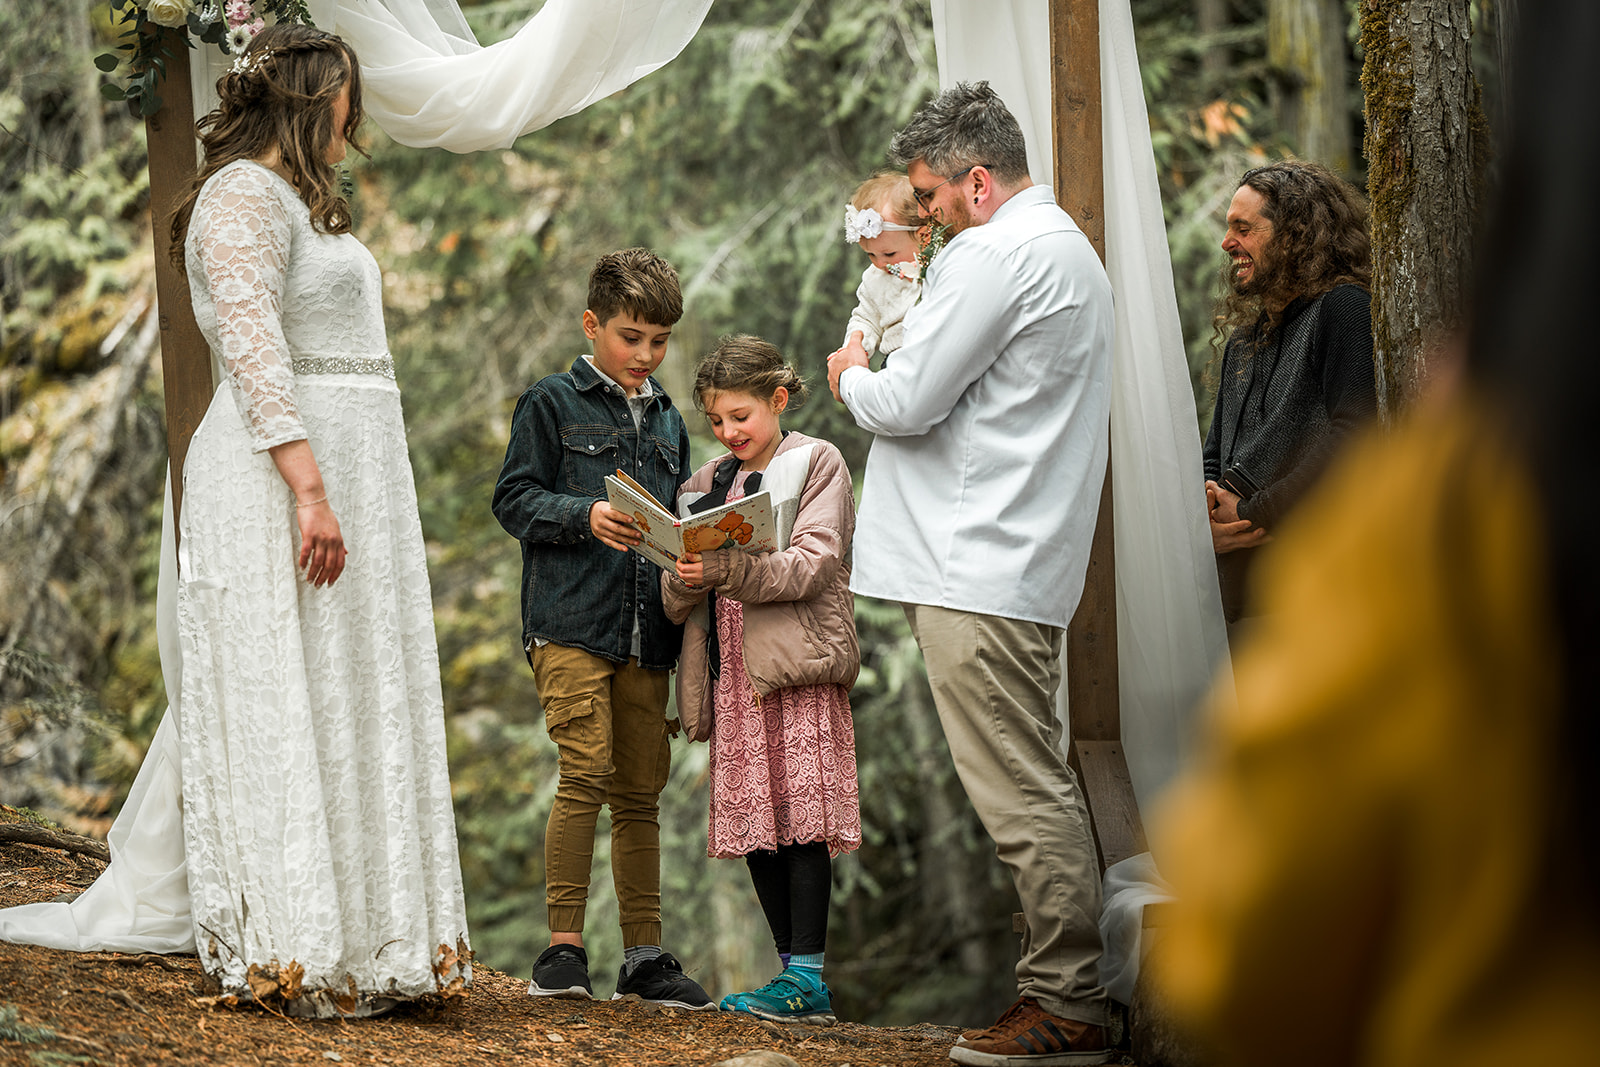 The bride and groom's children read a story about their parents